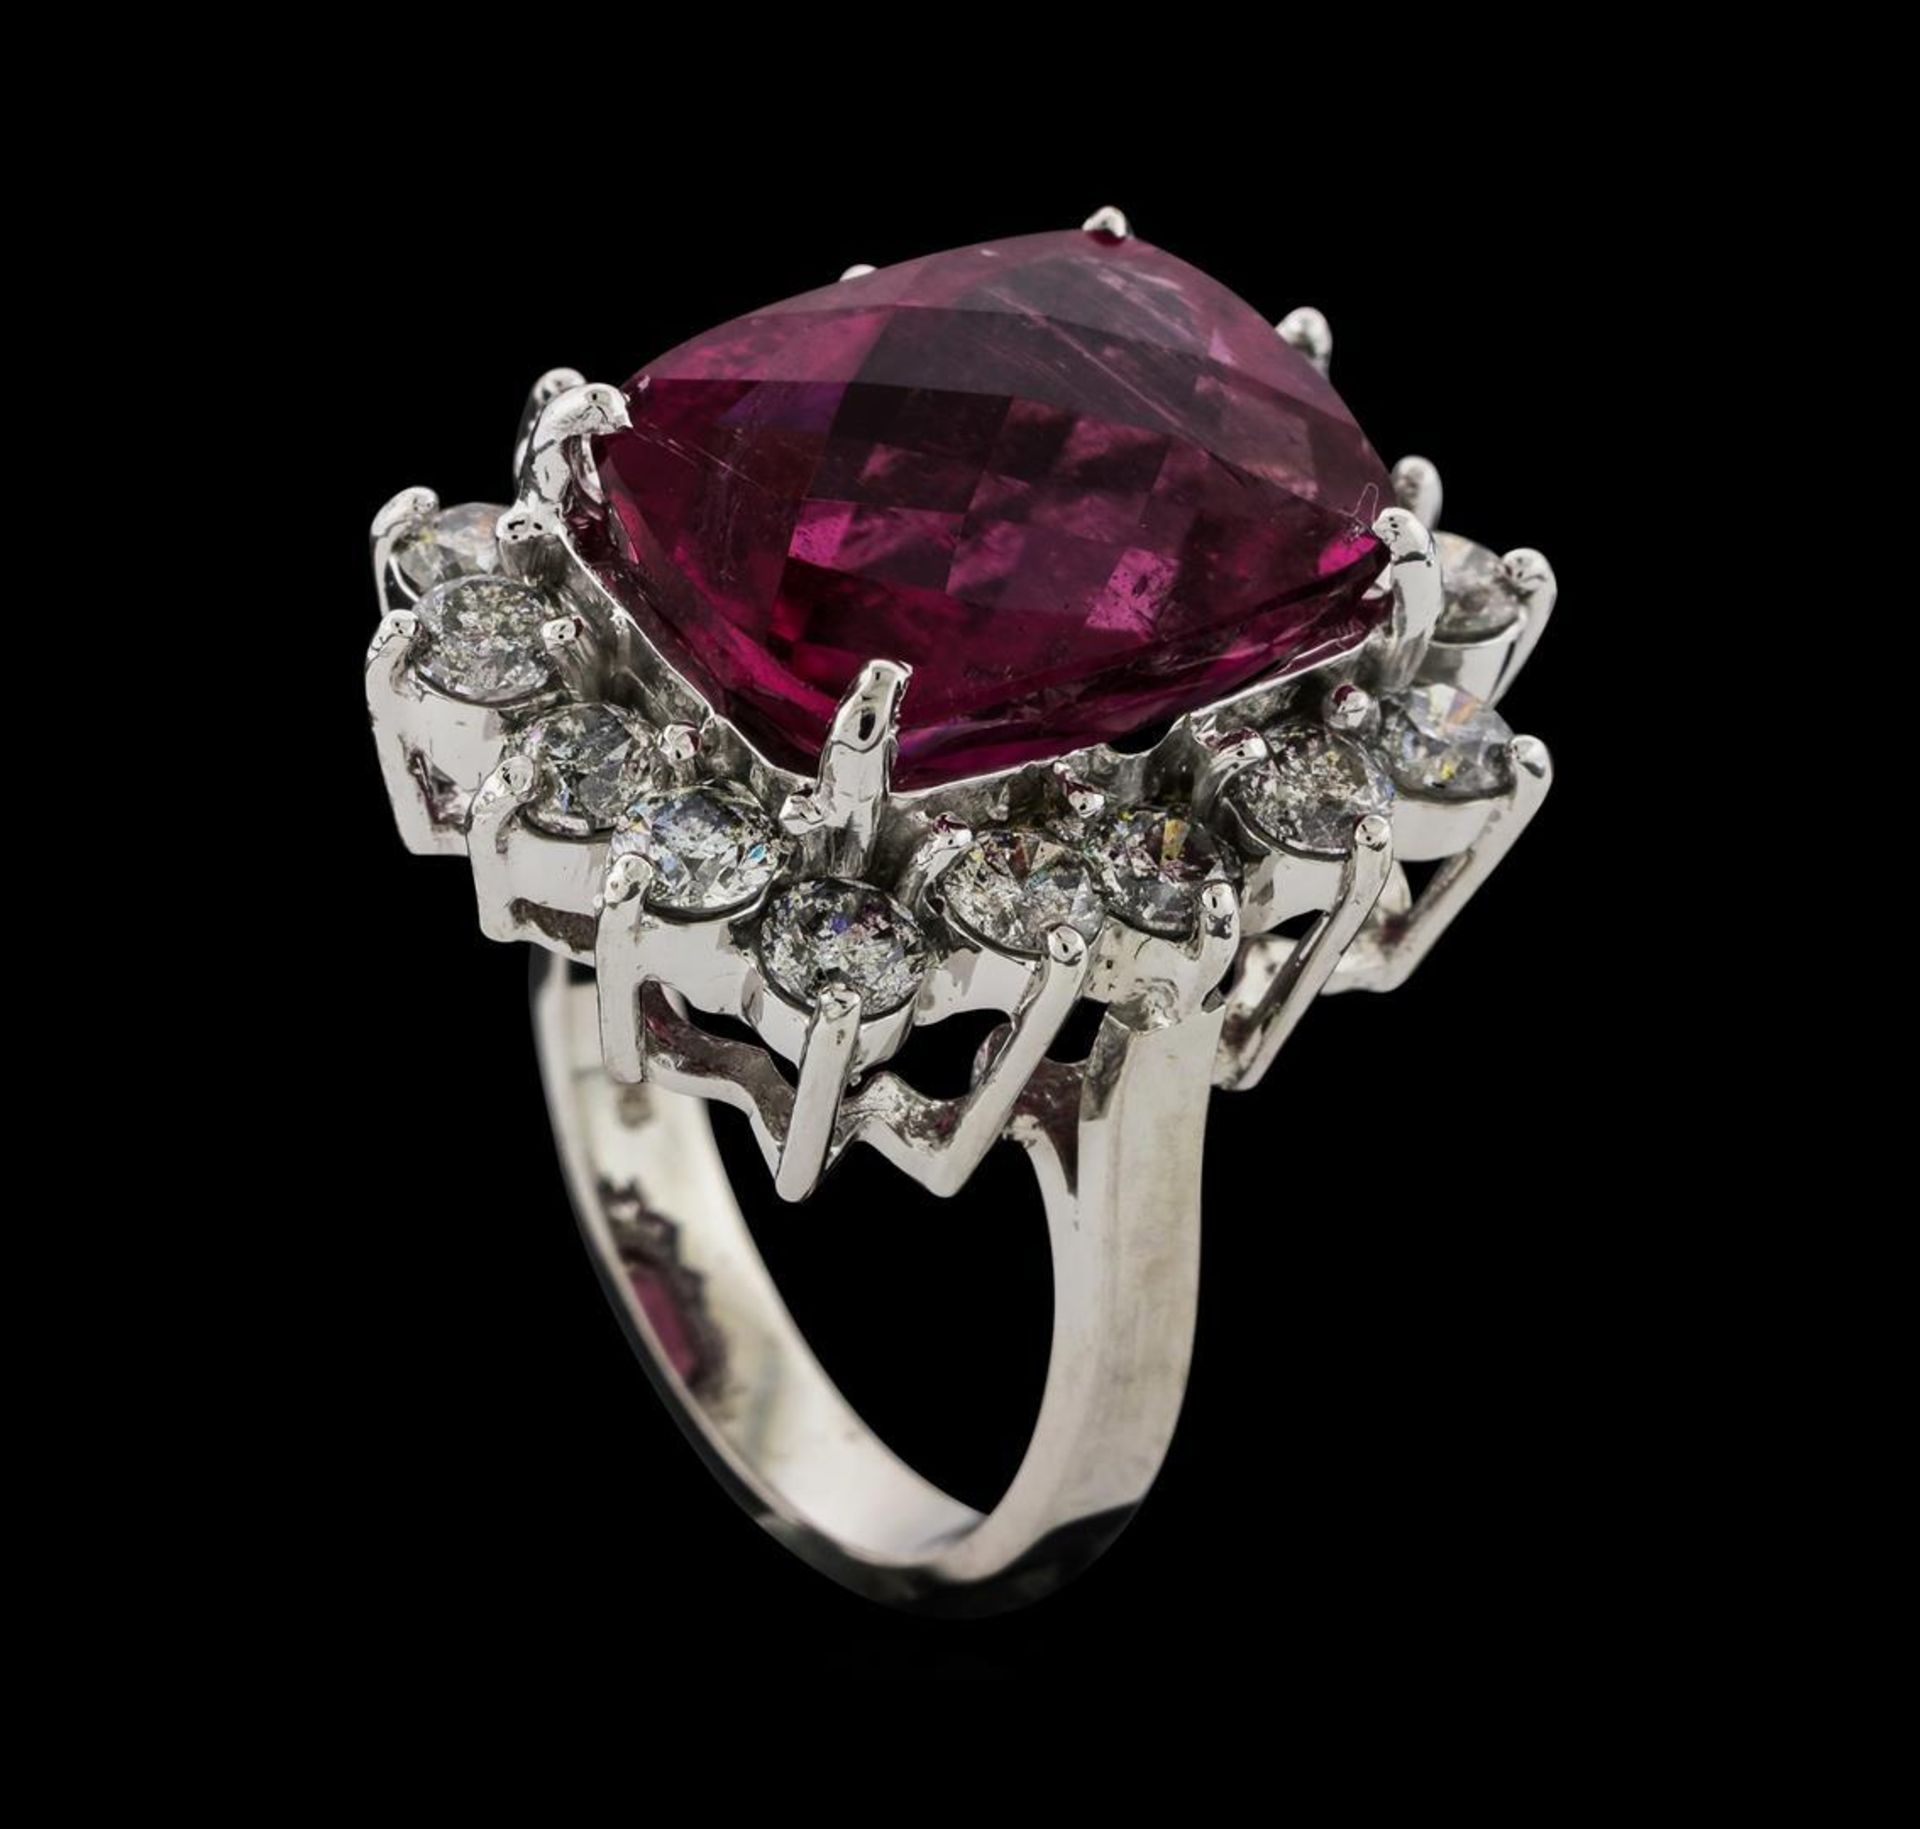 11.12 ctw Tourmaline and Diamond Ring - 14KT White Gold - Image 4 of 5